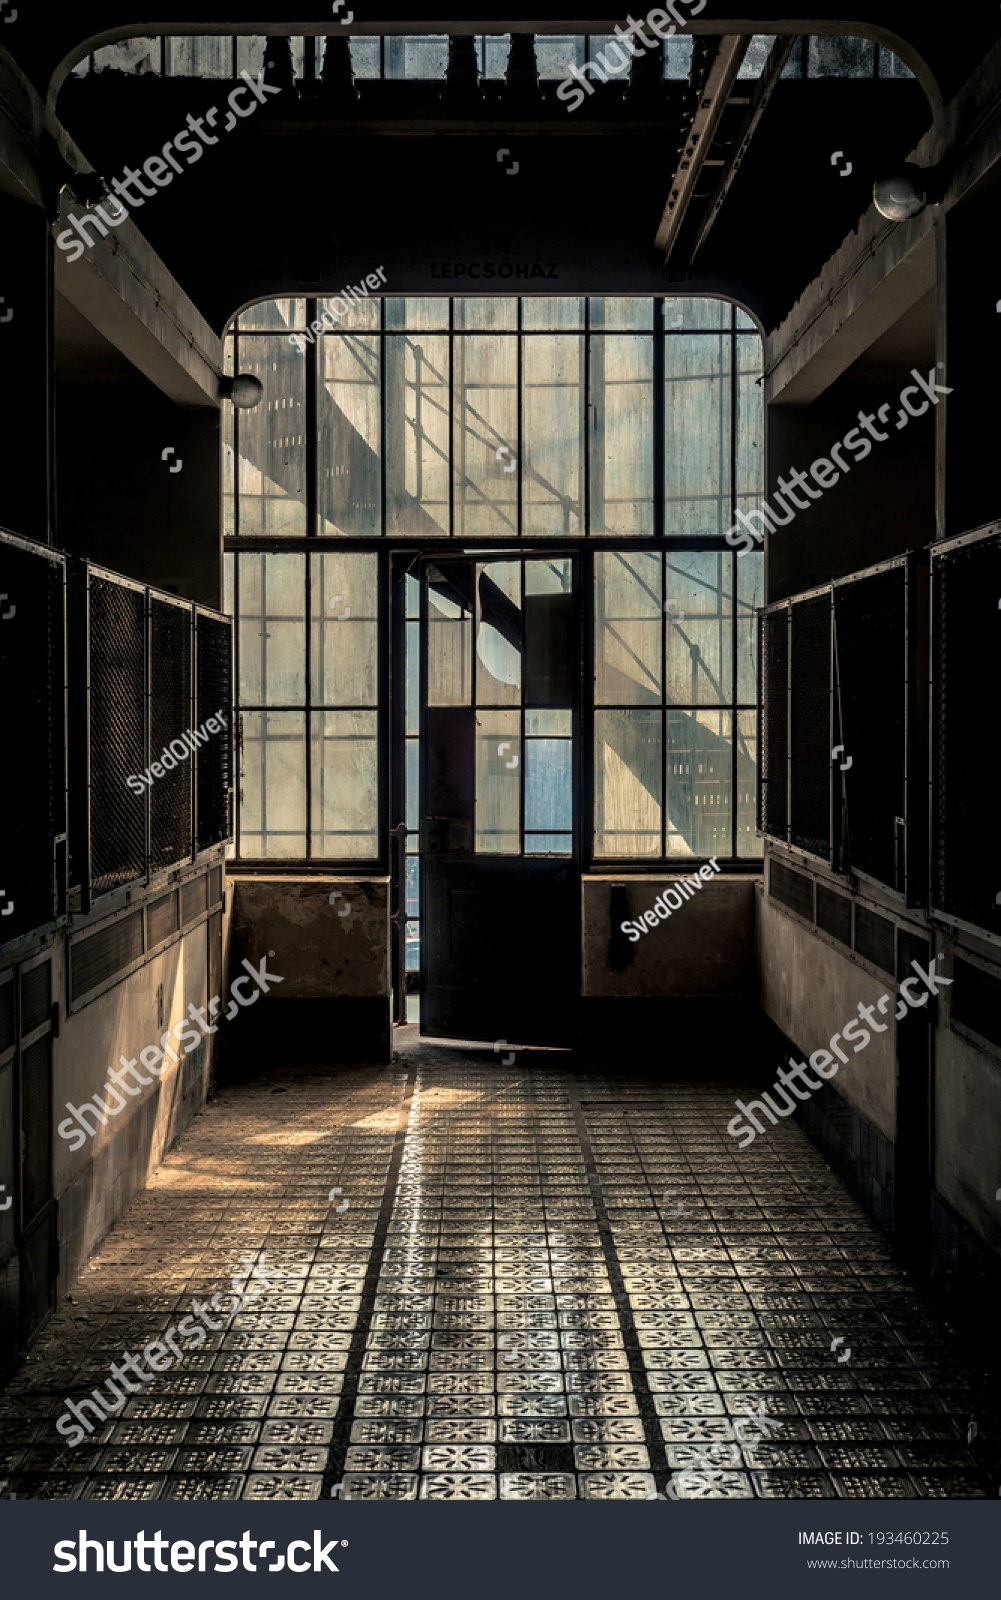 Industrial interior with br light from the windows #193460225